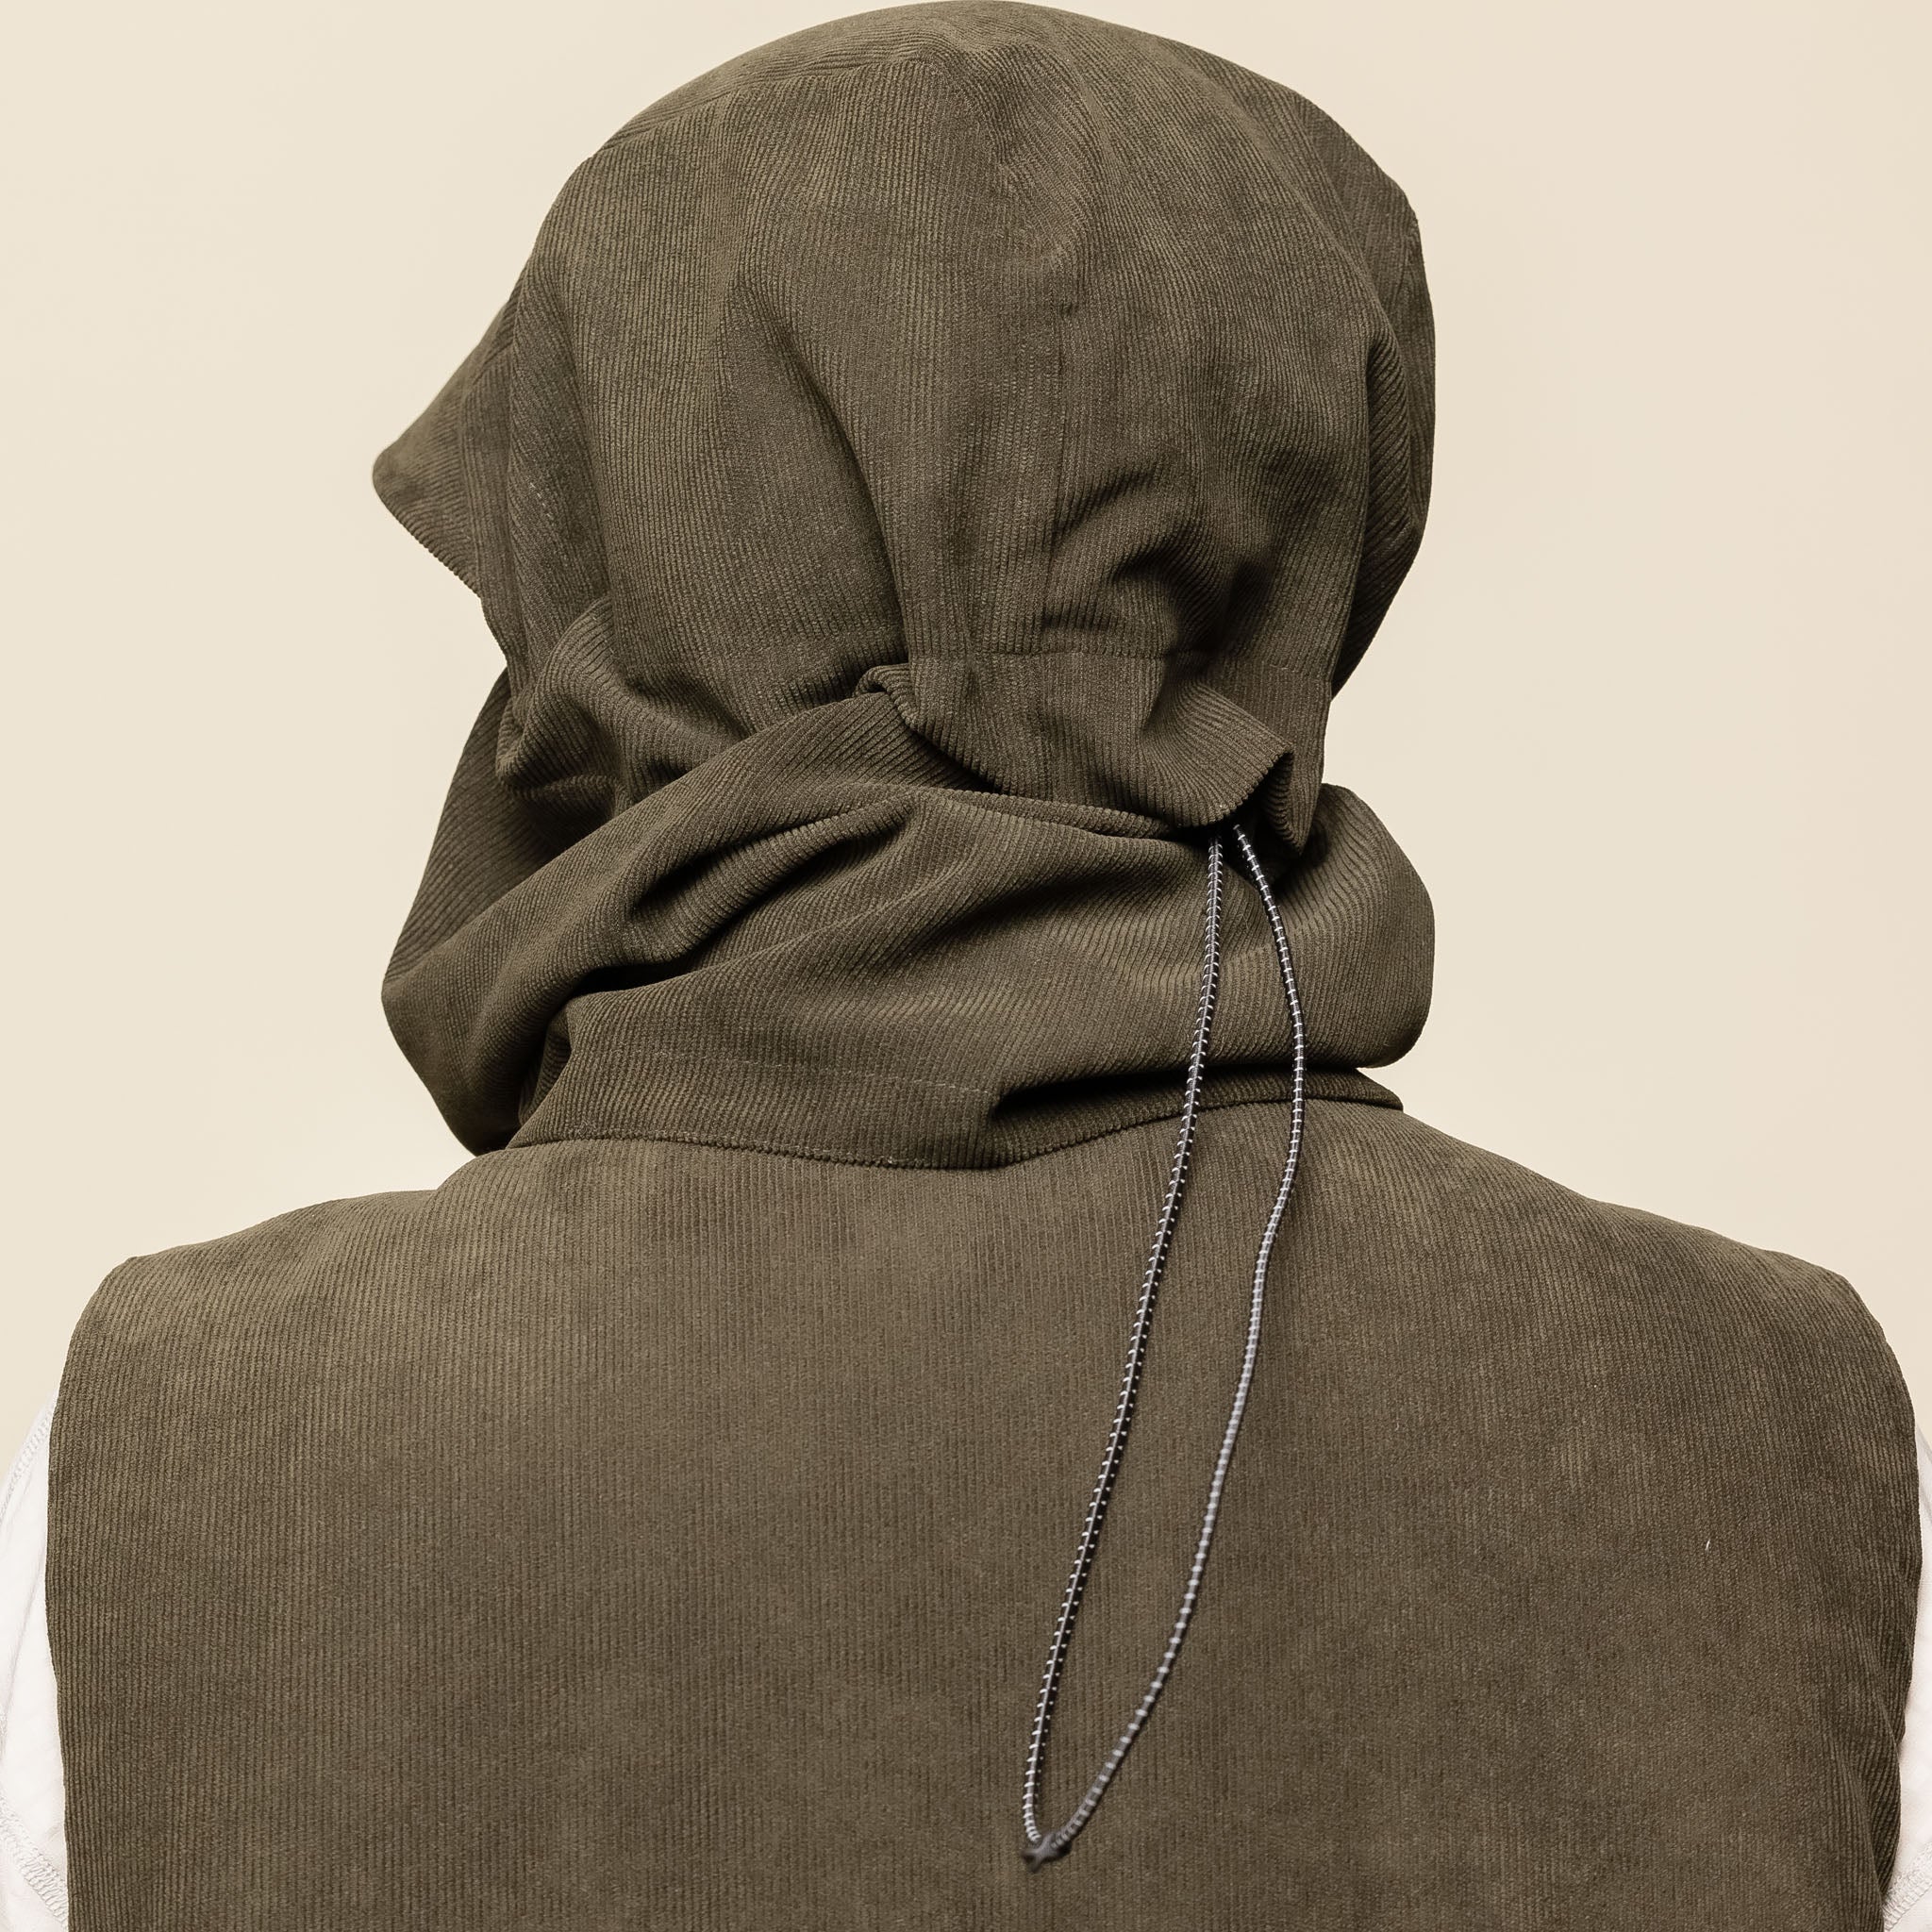 DEMARCOLAB - Active Cord Hooded Warmer - Olive "demarcolab" "demarcolab stockists" "demarcolab taiwan" "demarco lab"